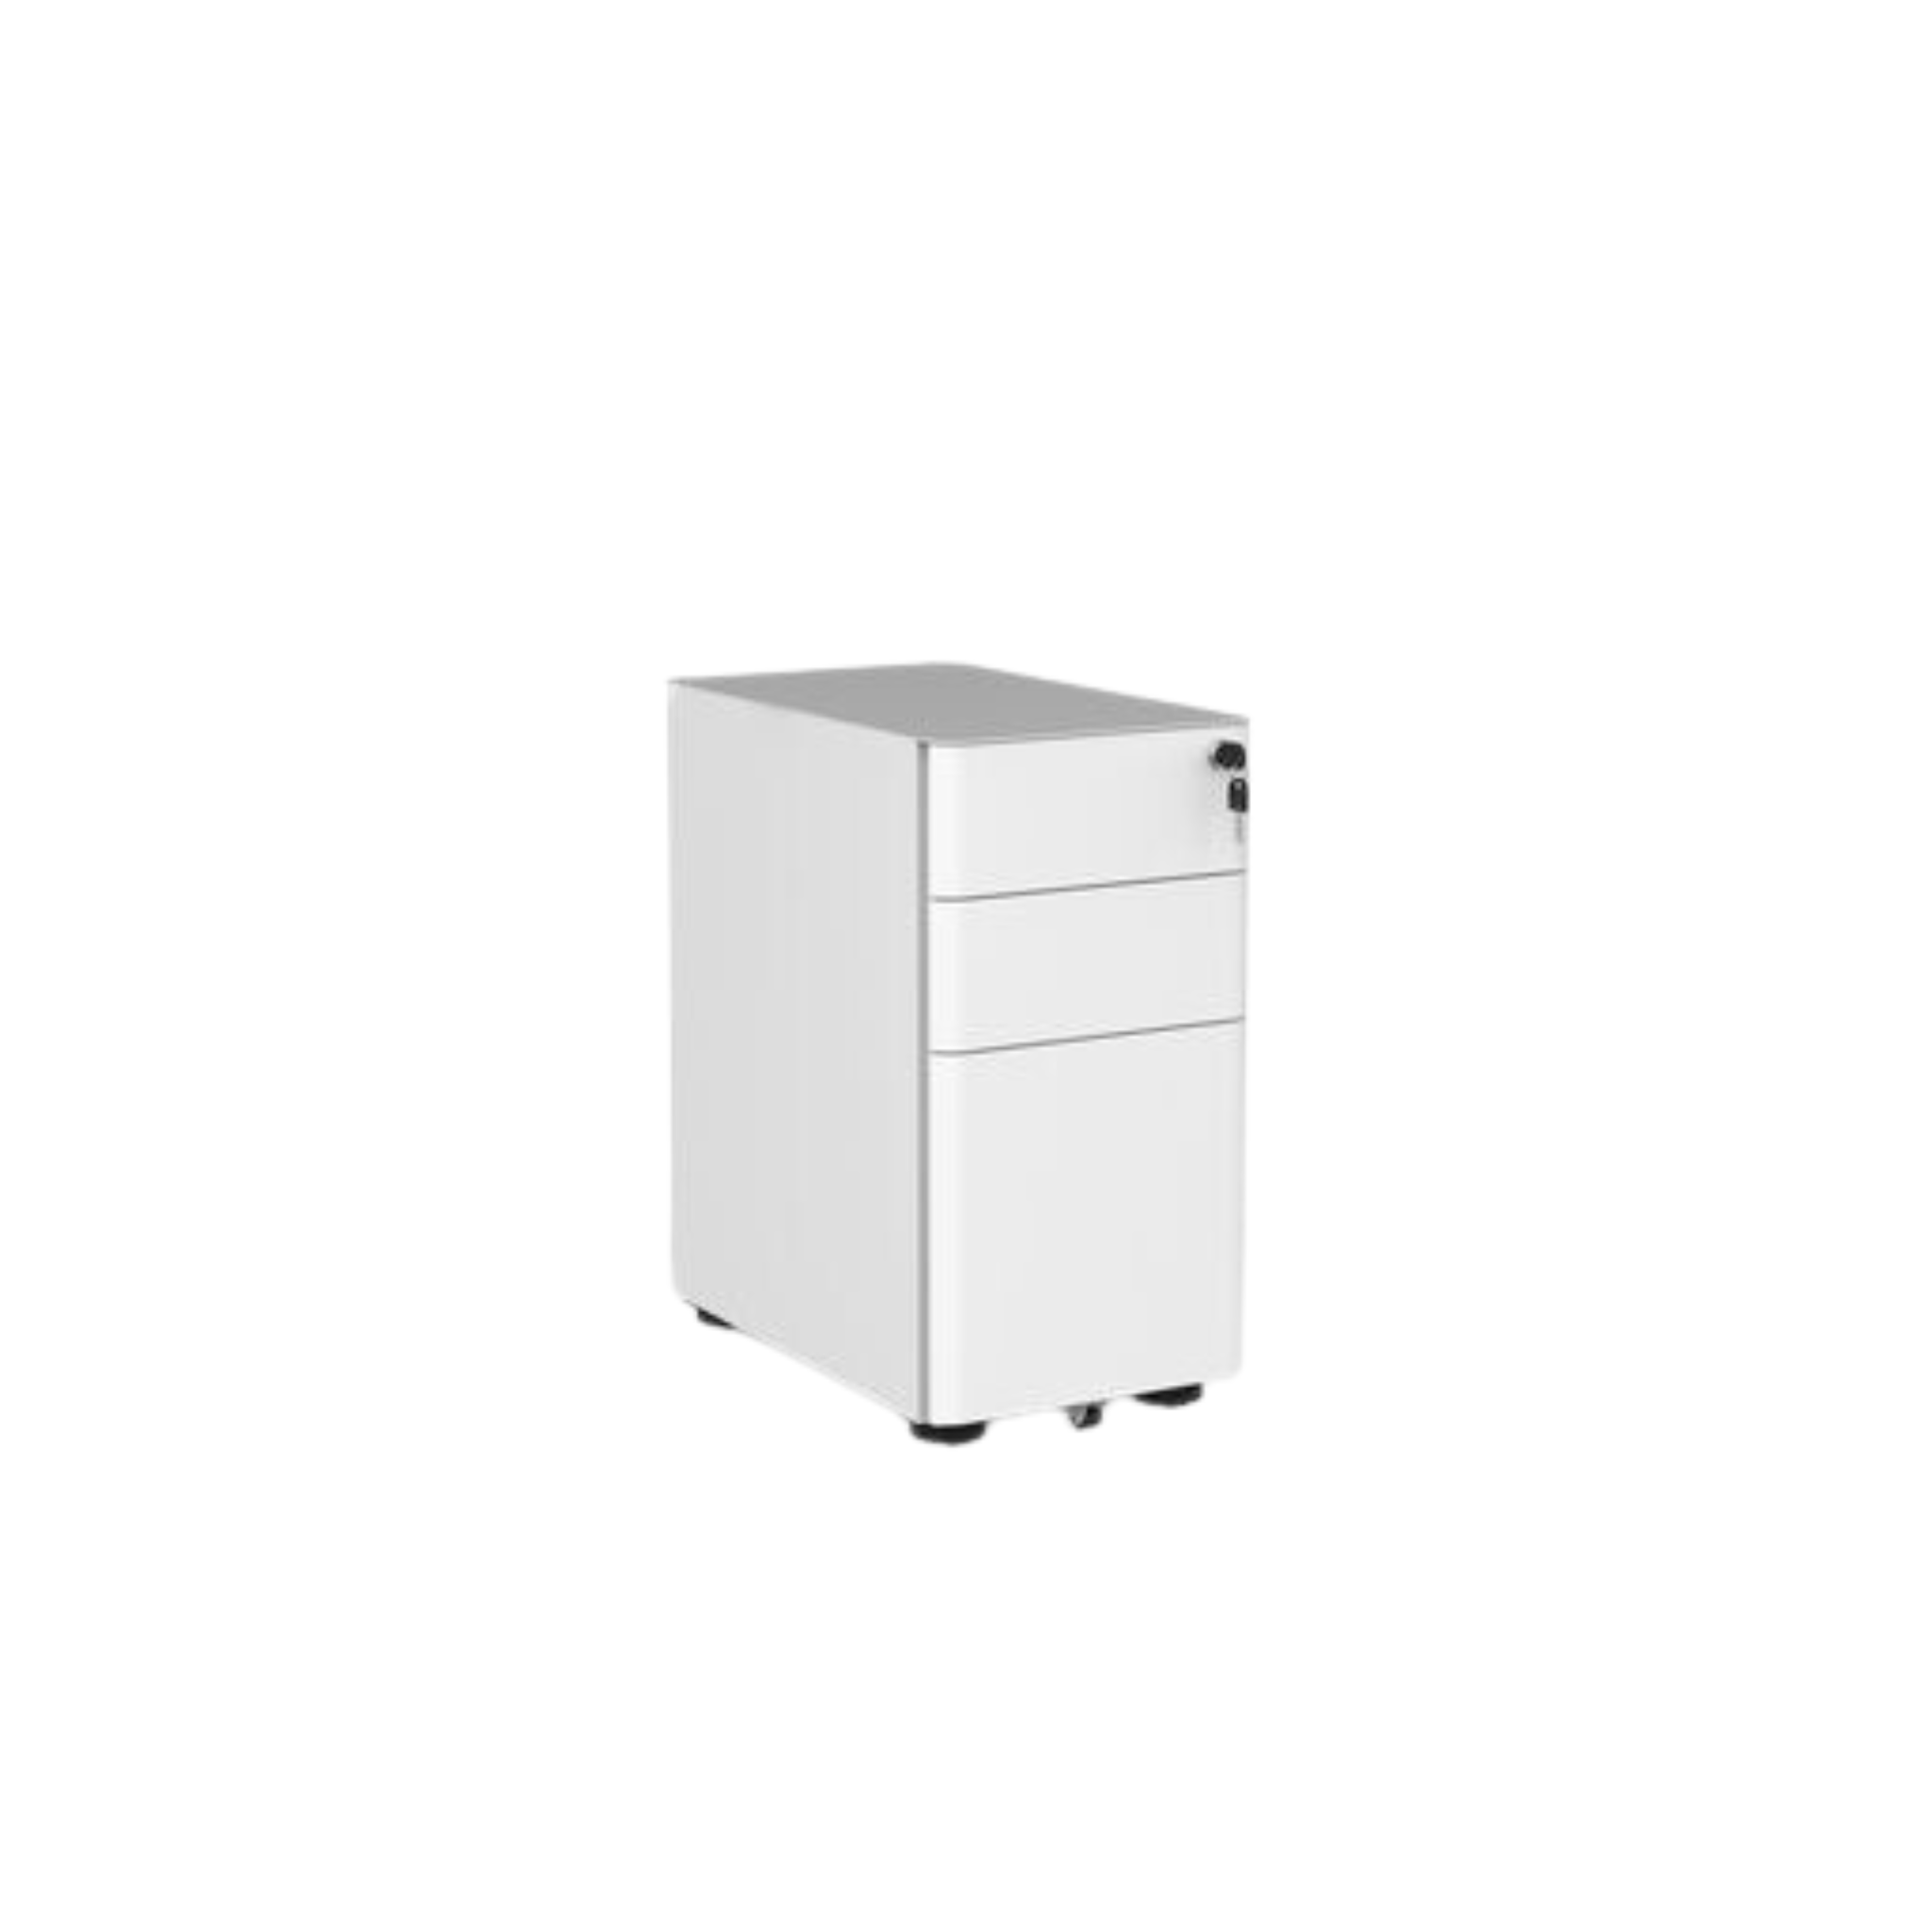 Agile slim size lockable metal mobile with 2 stationery drawers and 1 filing drawer in white